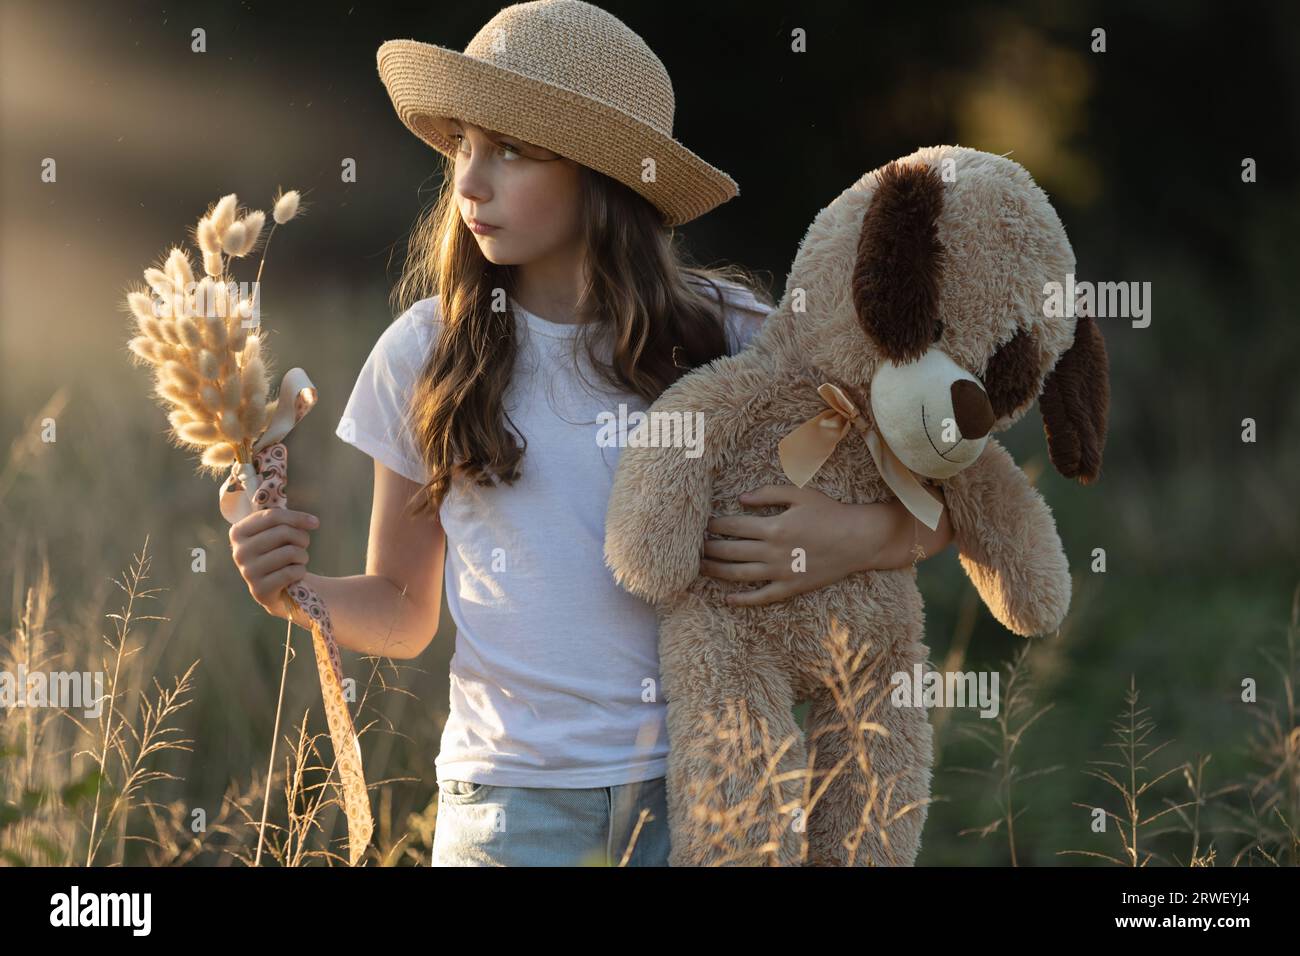 Young Caucasian girl wearing a hat and holding a posy of dried grass and her teddy bear whilst looking sideways at sunset Stock Photo